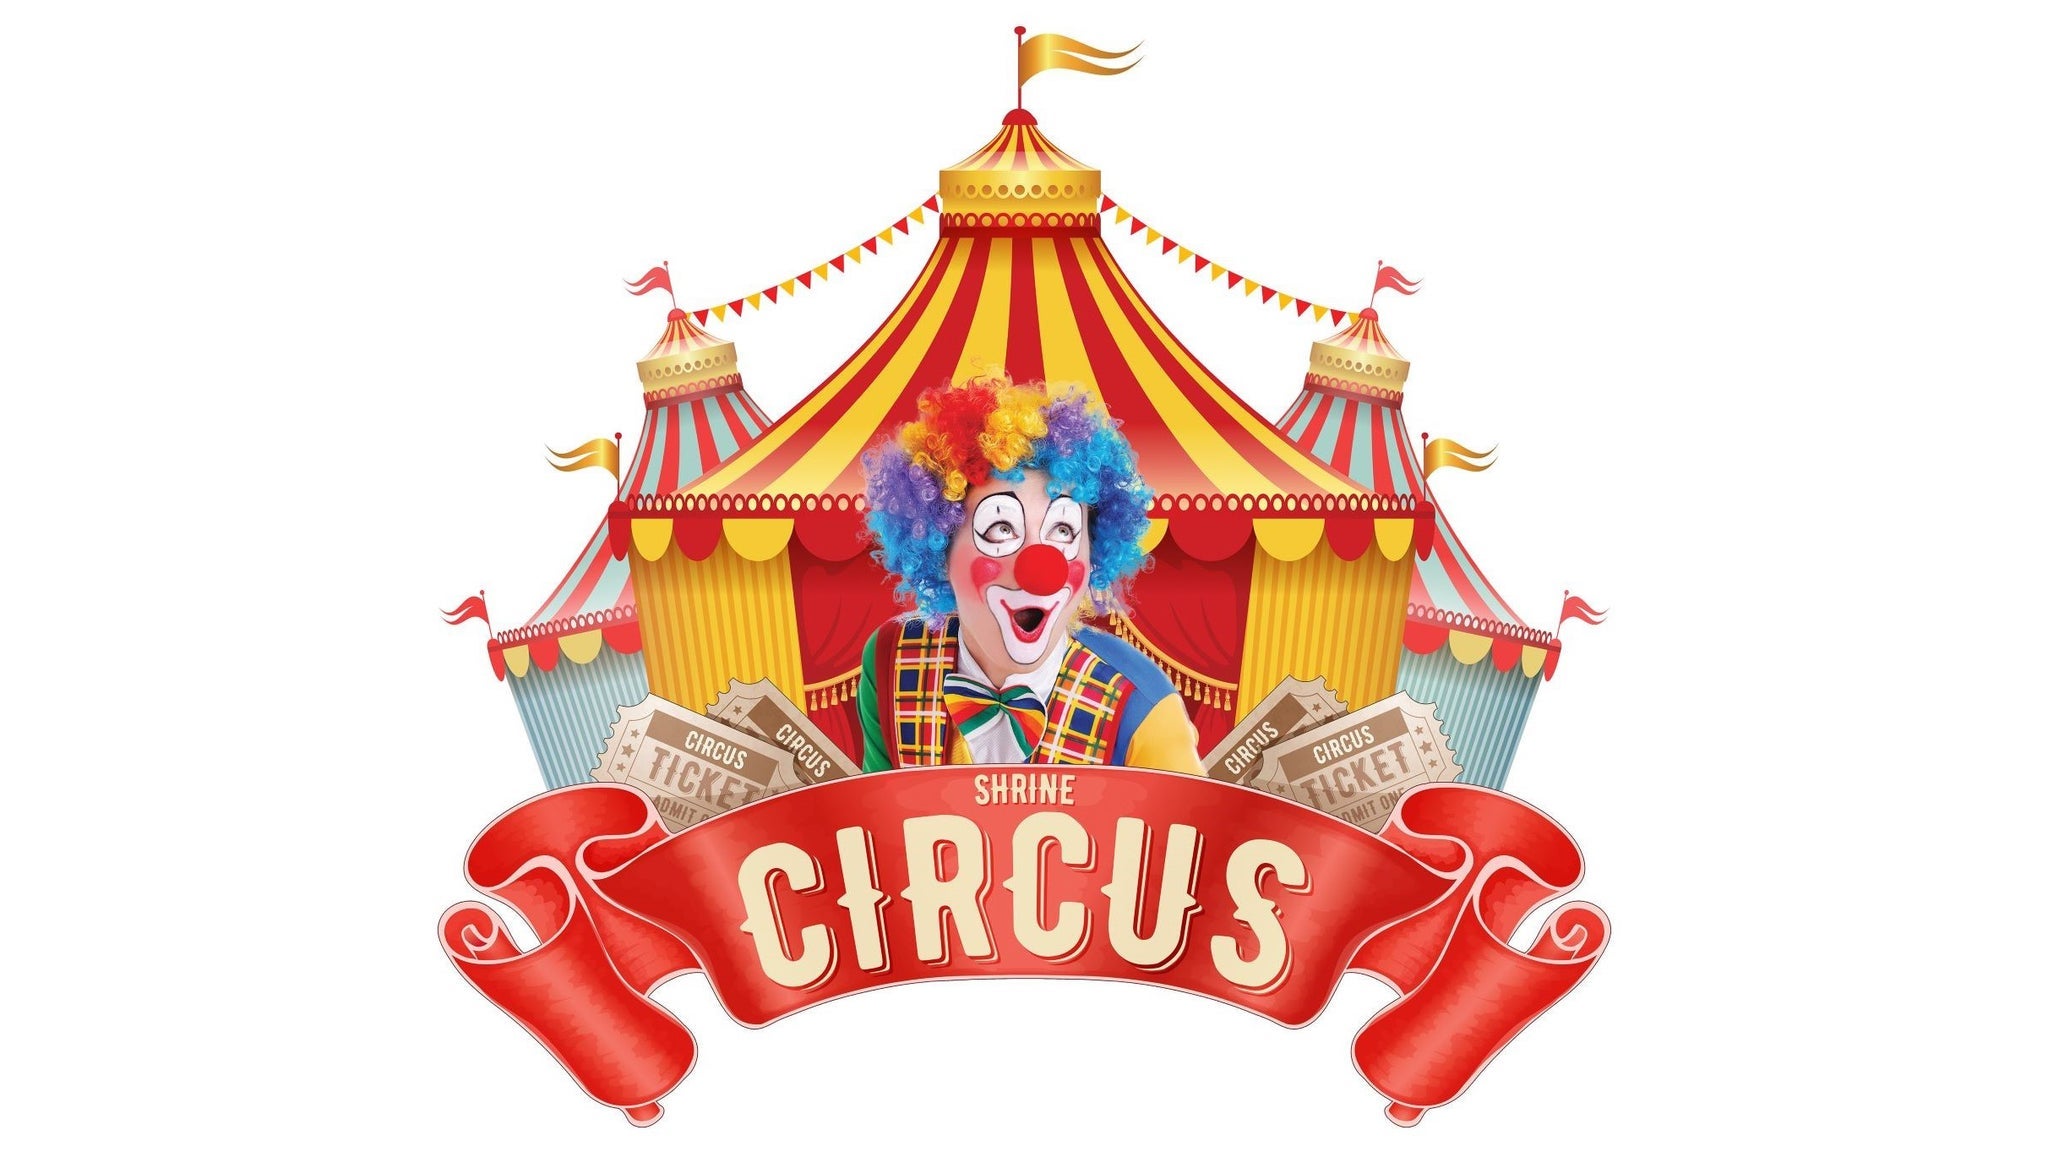 Shrine Circus 2022 at Cable Dahmer Arena